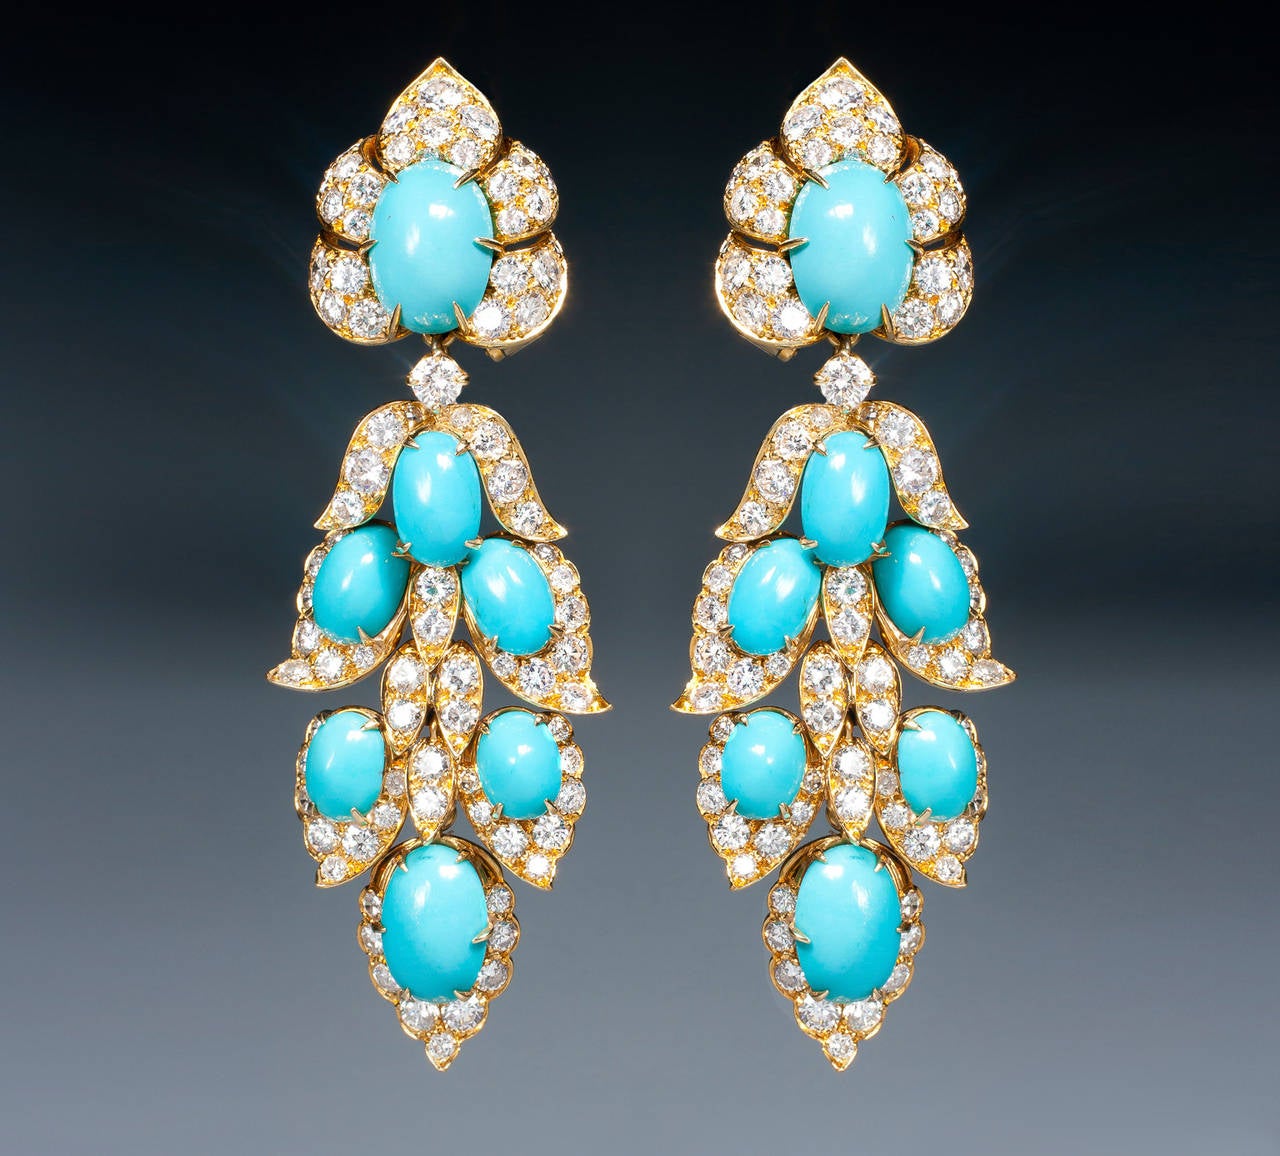 Magnificent 1960s Van Cleef & Arpels Turquoise Diamond Gold Earrings In Excellent Condition For Sale In Kortrijk, BE